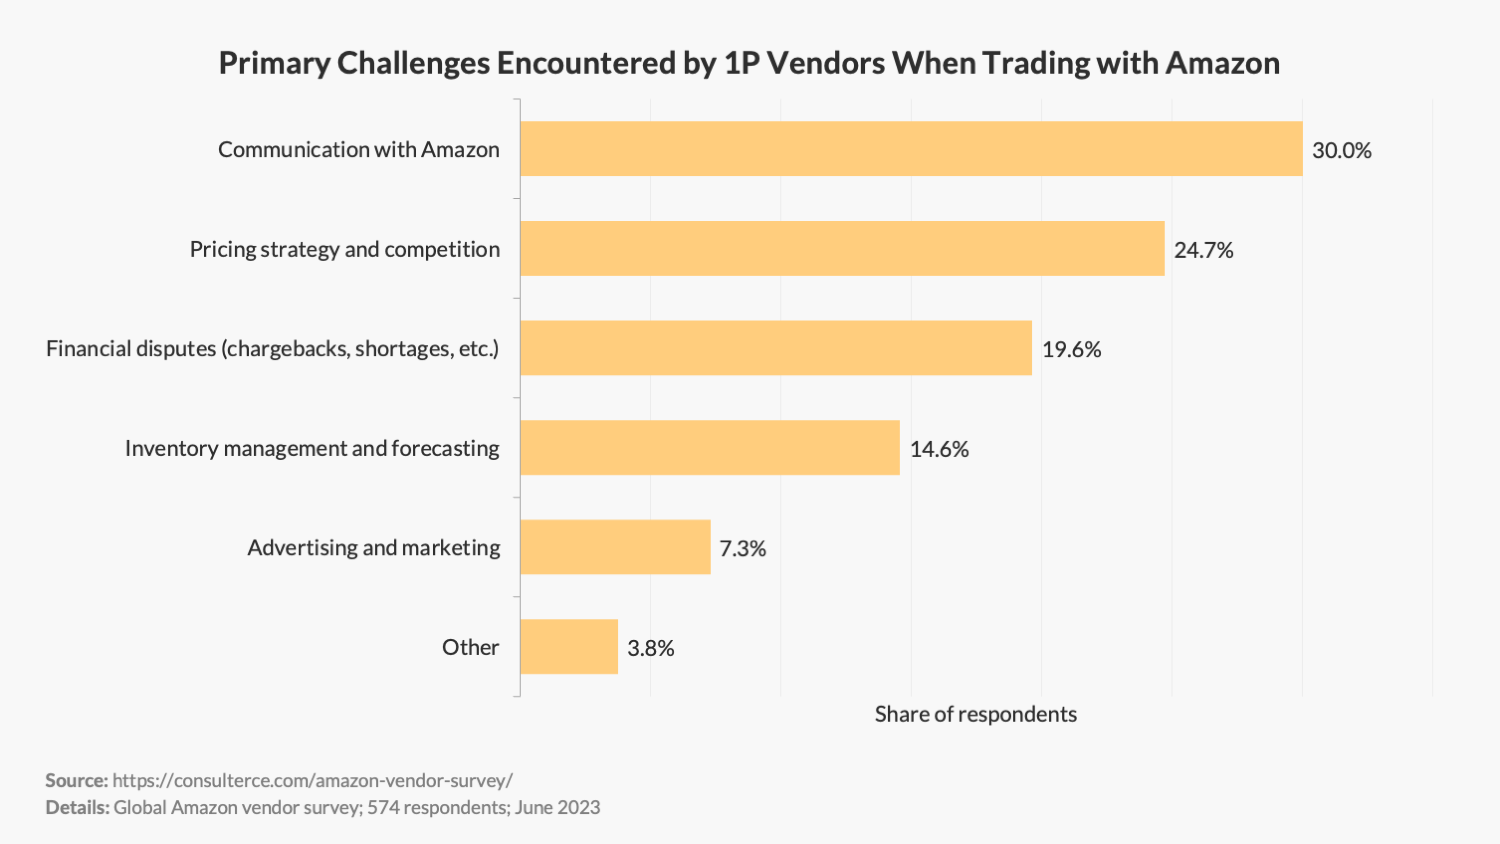 Primary Challenges Encountered by 1P Vendors When Trading with Amazon